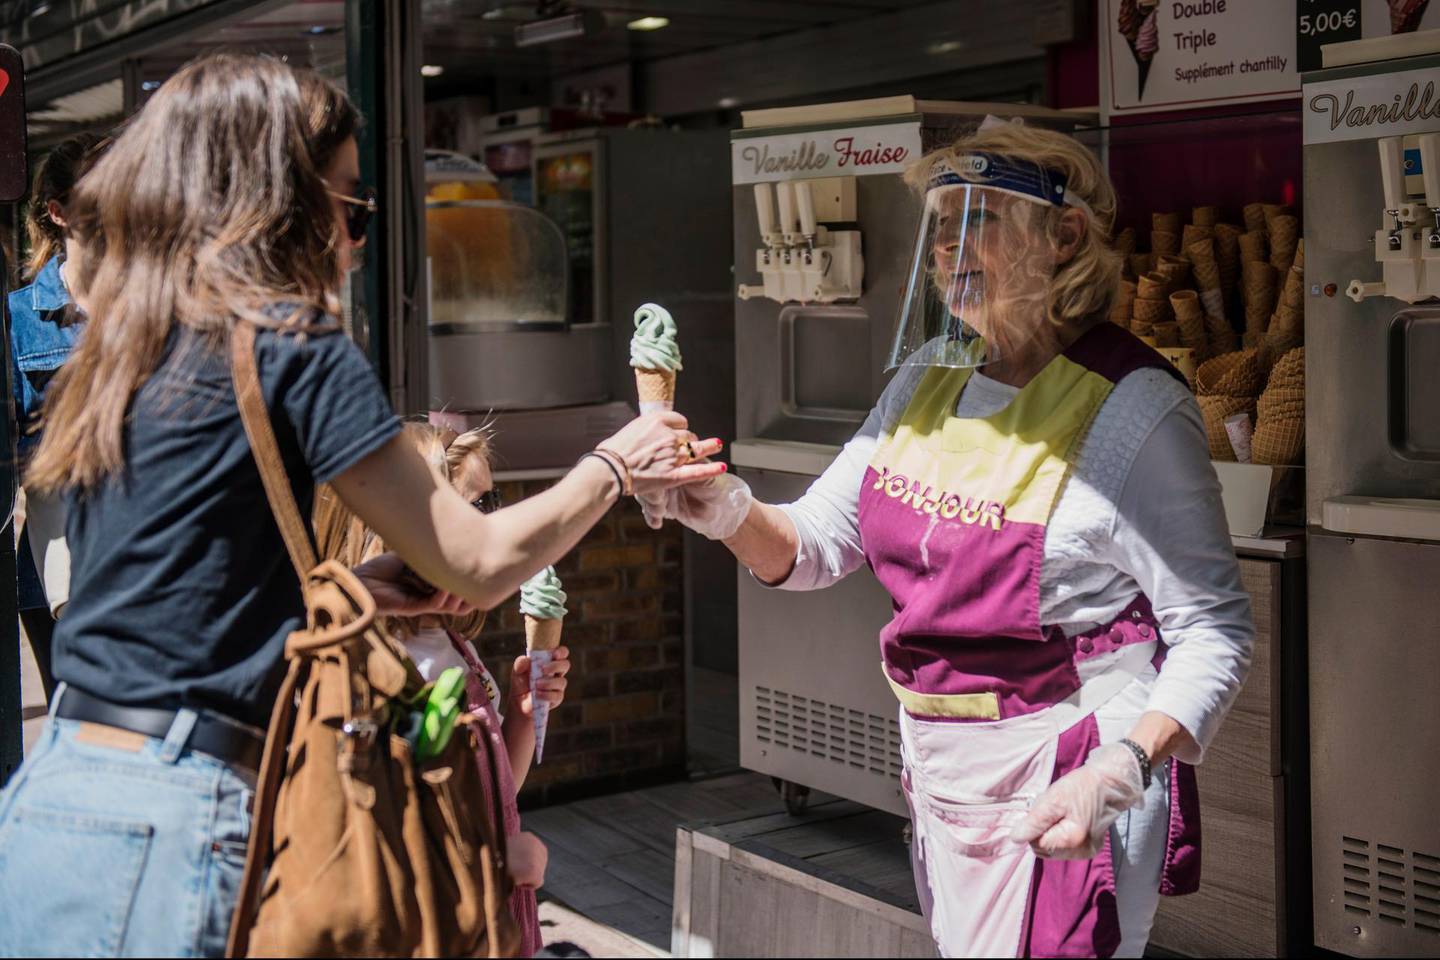 epa08428580 An ice cream seller wears a protective mask works during the first week end after two months of strict lockdown in Paris, France, 17 May 2020. France began a gradual easing of its lockdown measures and restrictions amid the COVID-19 pandemic.  EPA/Julien de Rosa